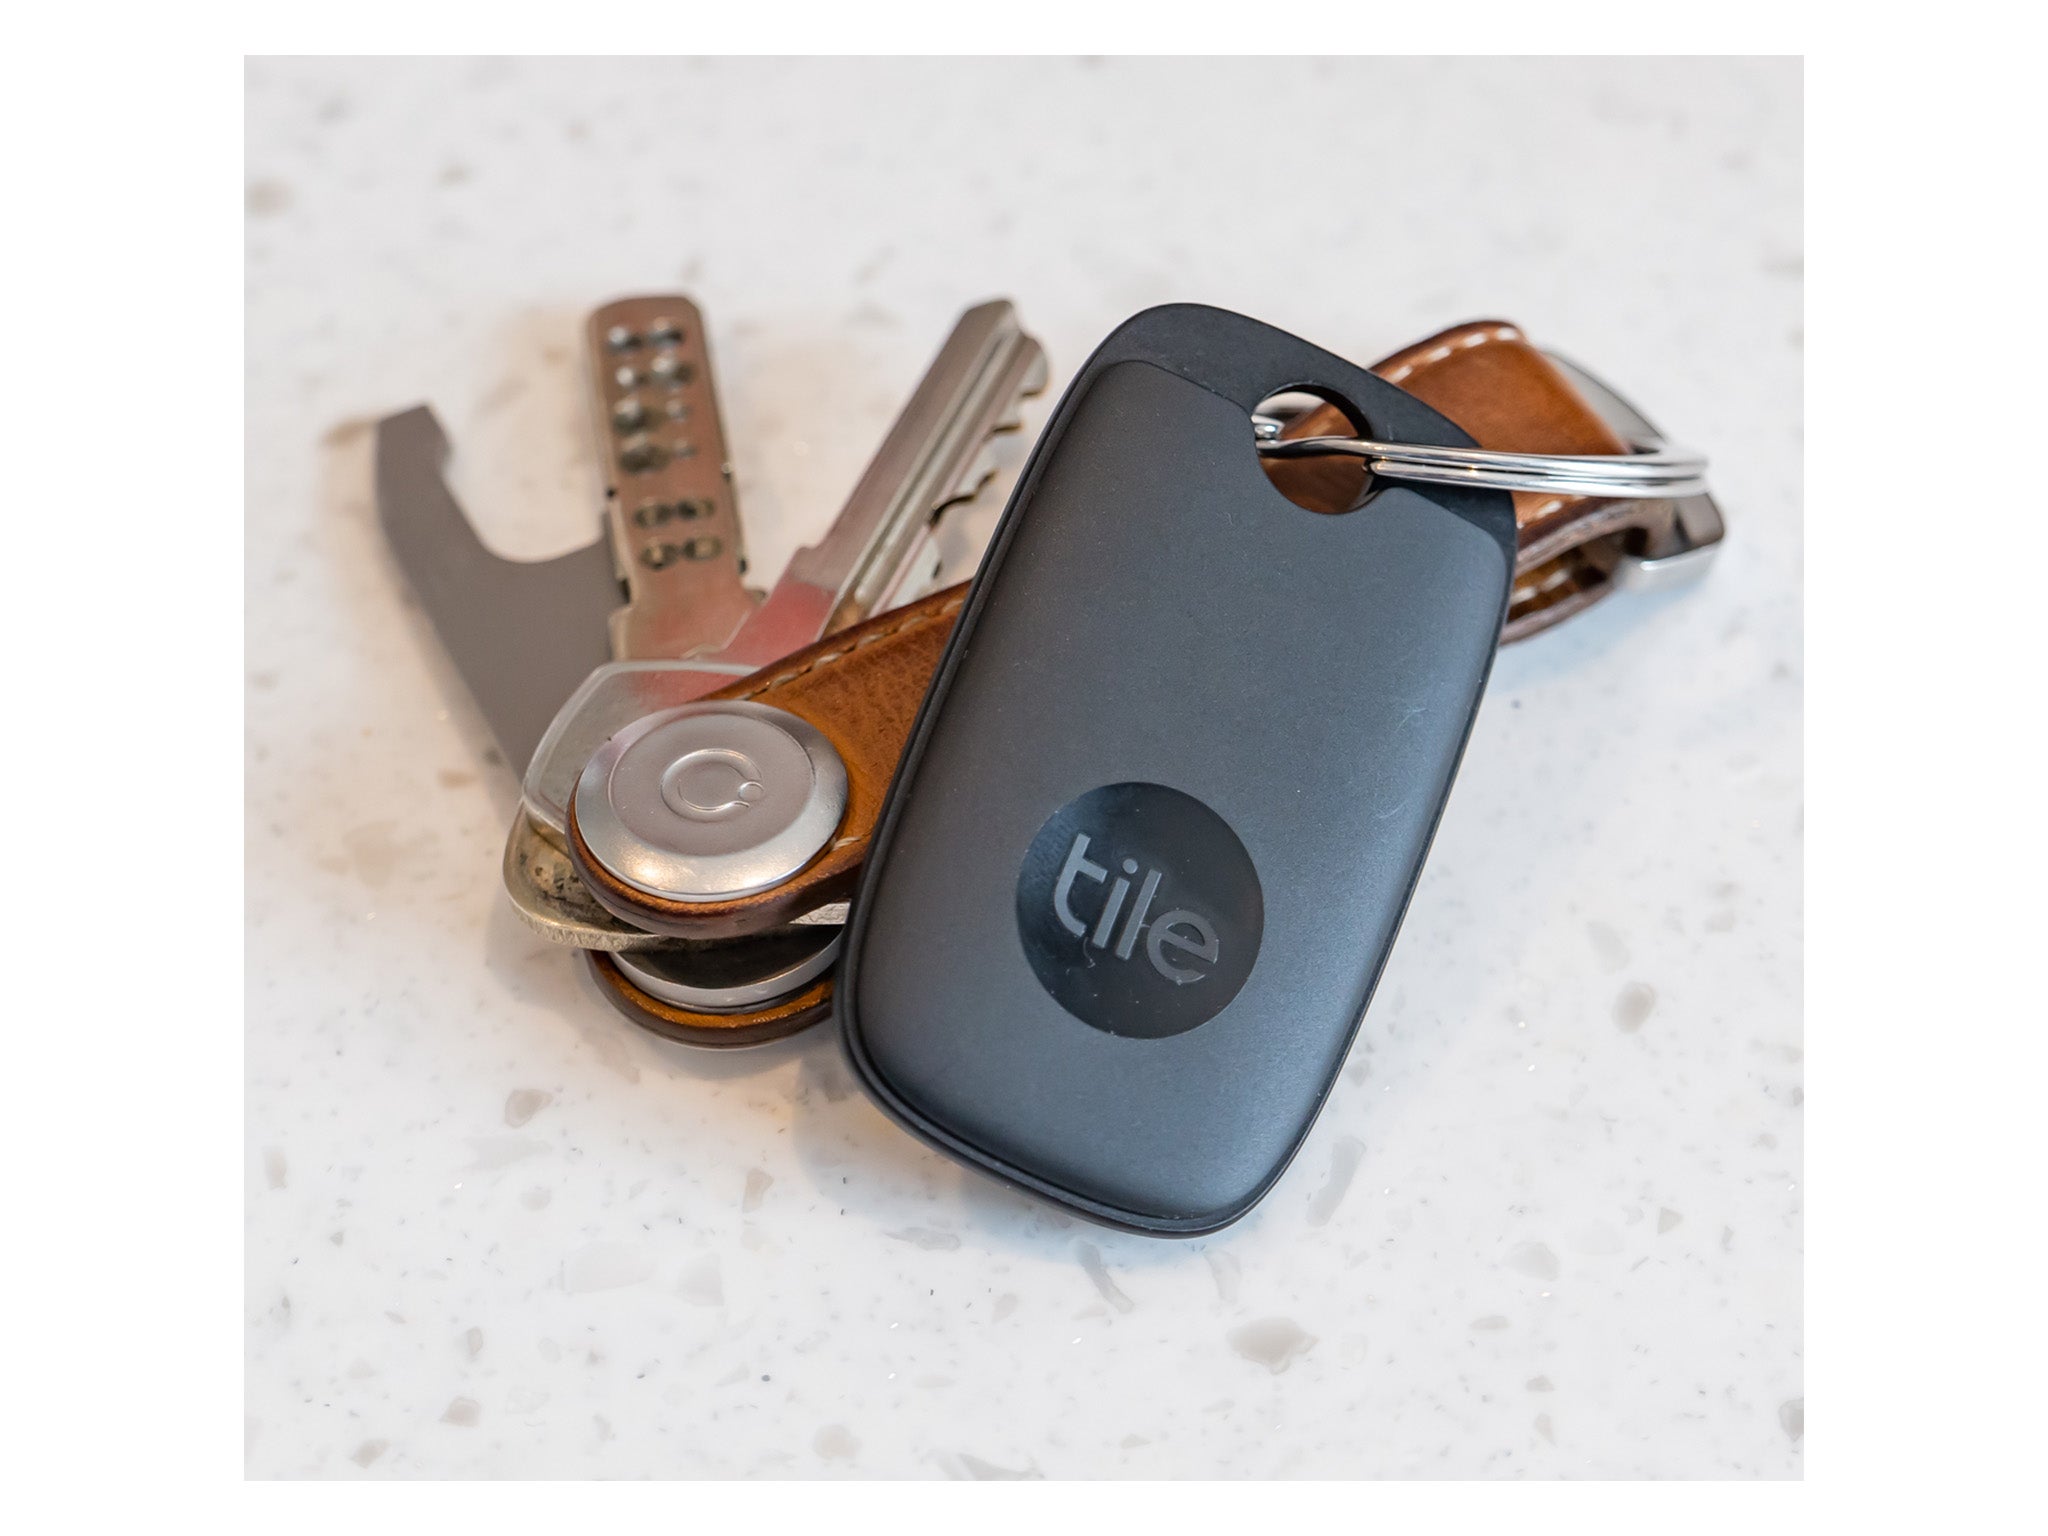 Tile Pro review: The bluetooth tracker that's built to last - Android  Authority